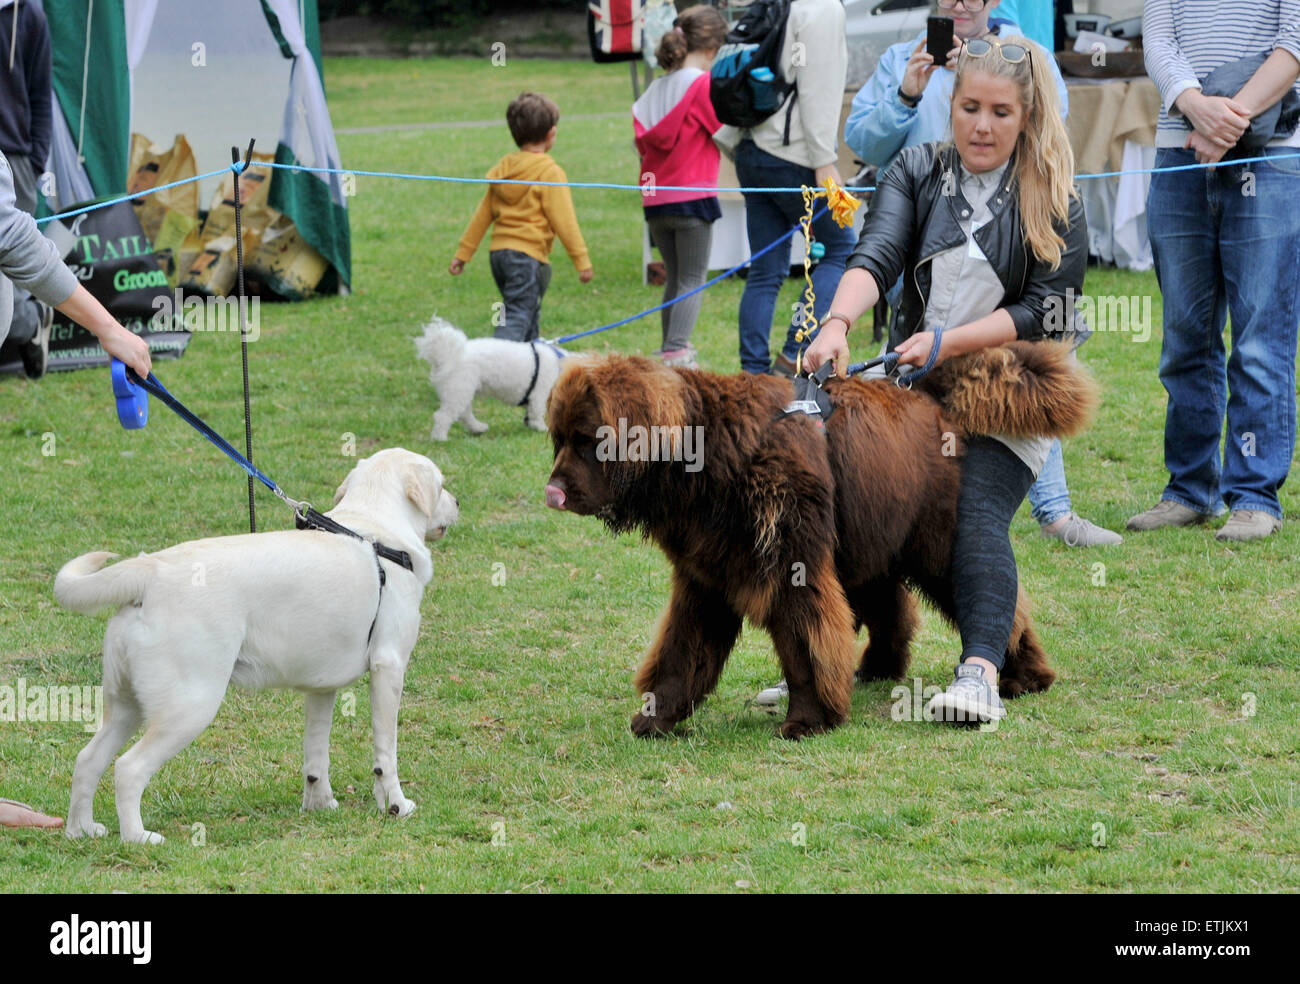 Brighton, UK. 14th June, 2015. Charlie Virgo hangs on to Doug her Newfoundland at the annual Bark in the Park Dog Show held at Queens Park in Brighton Stock Photo